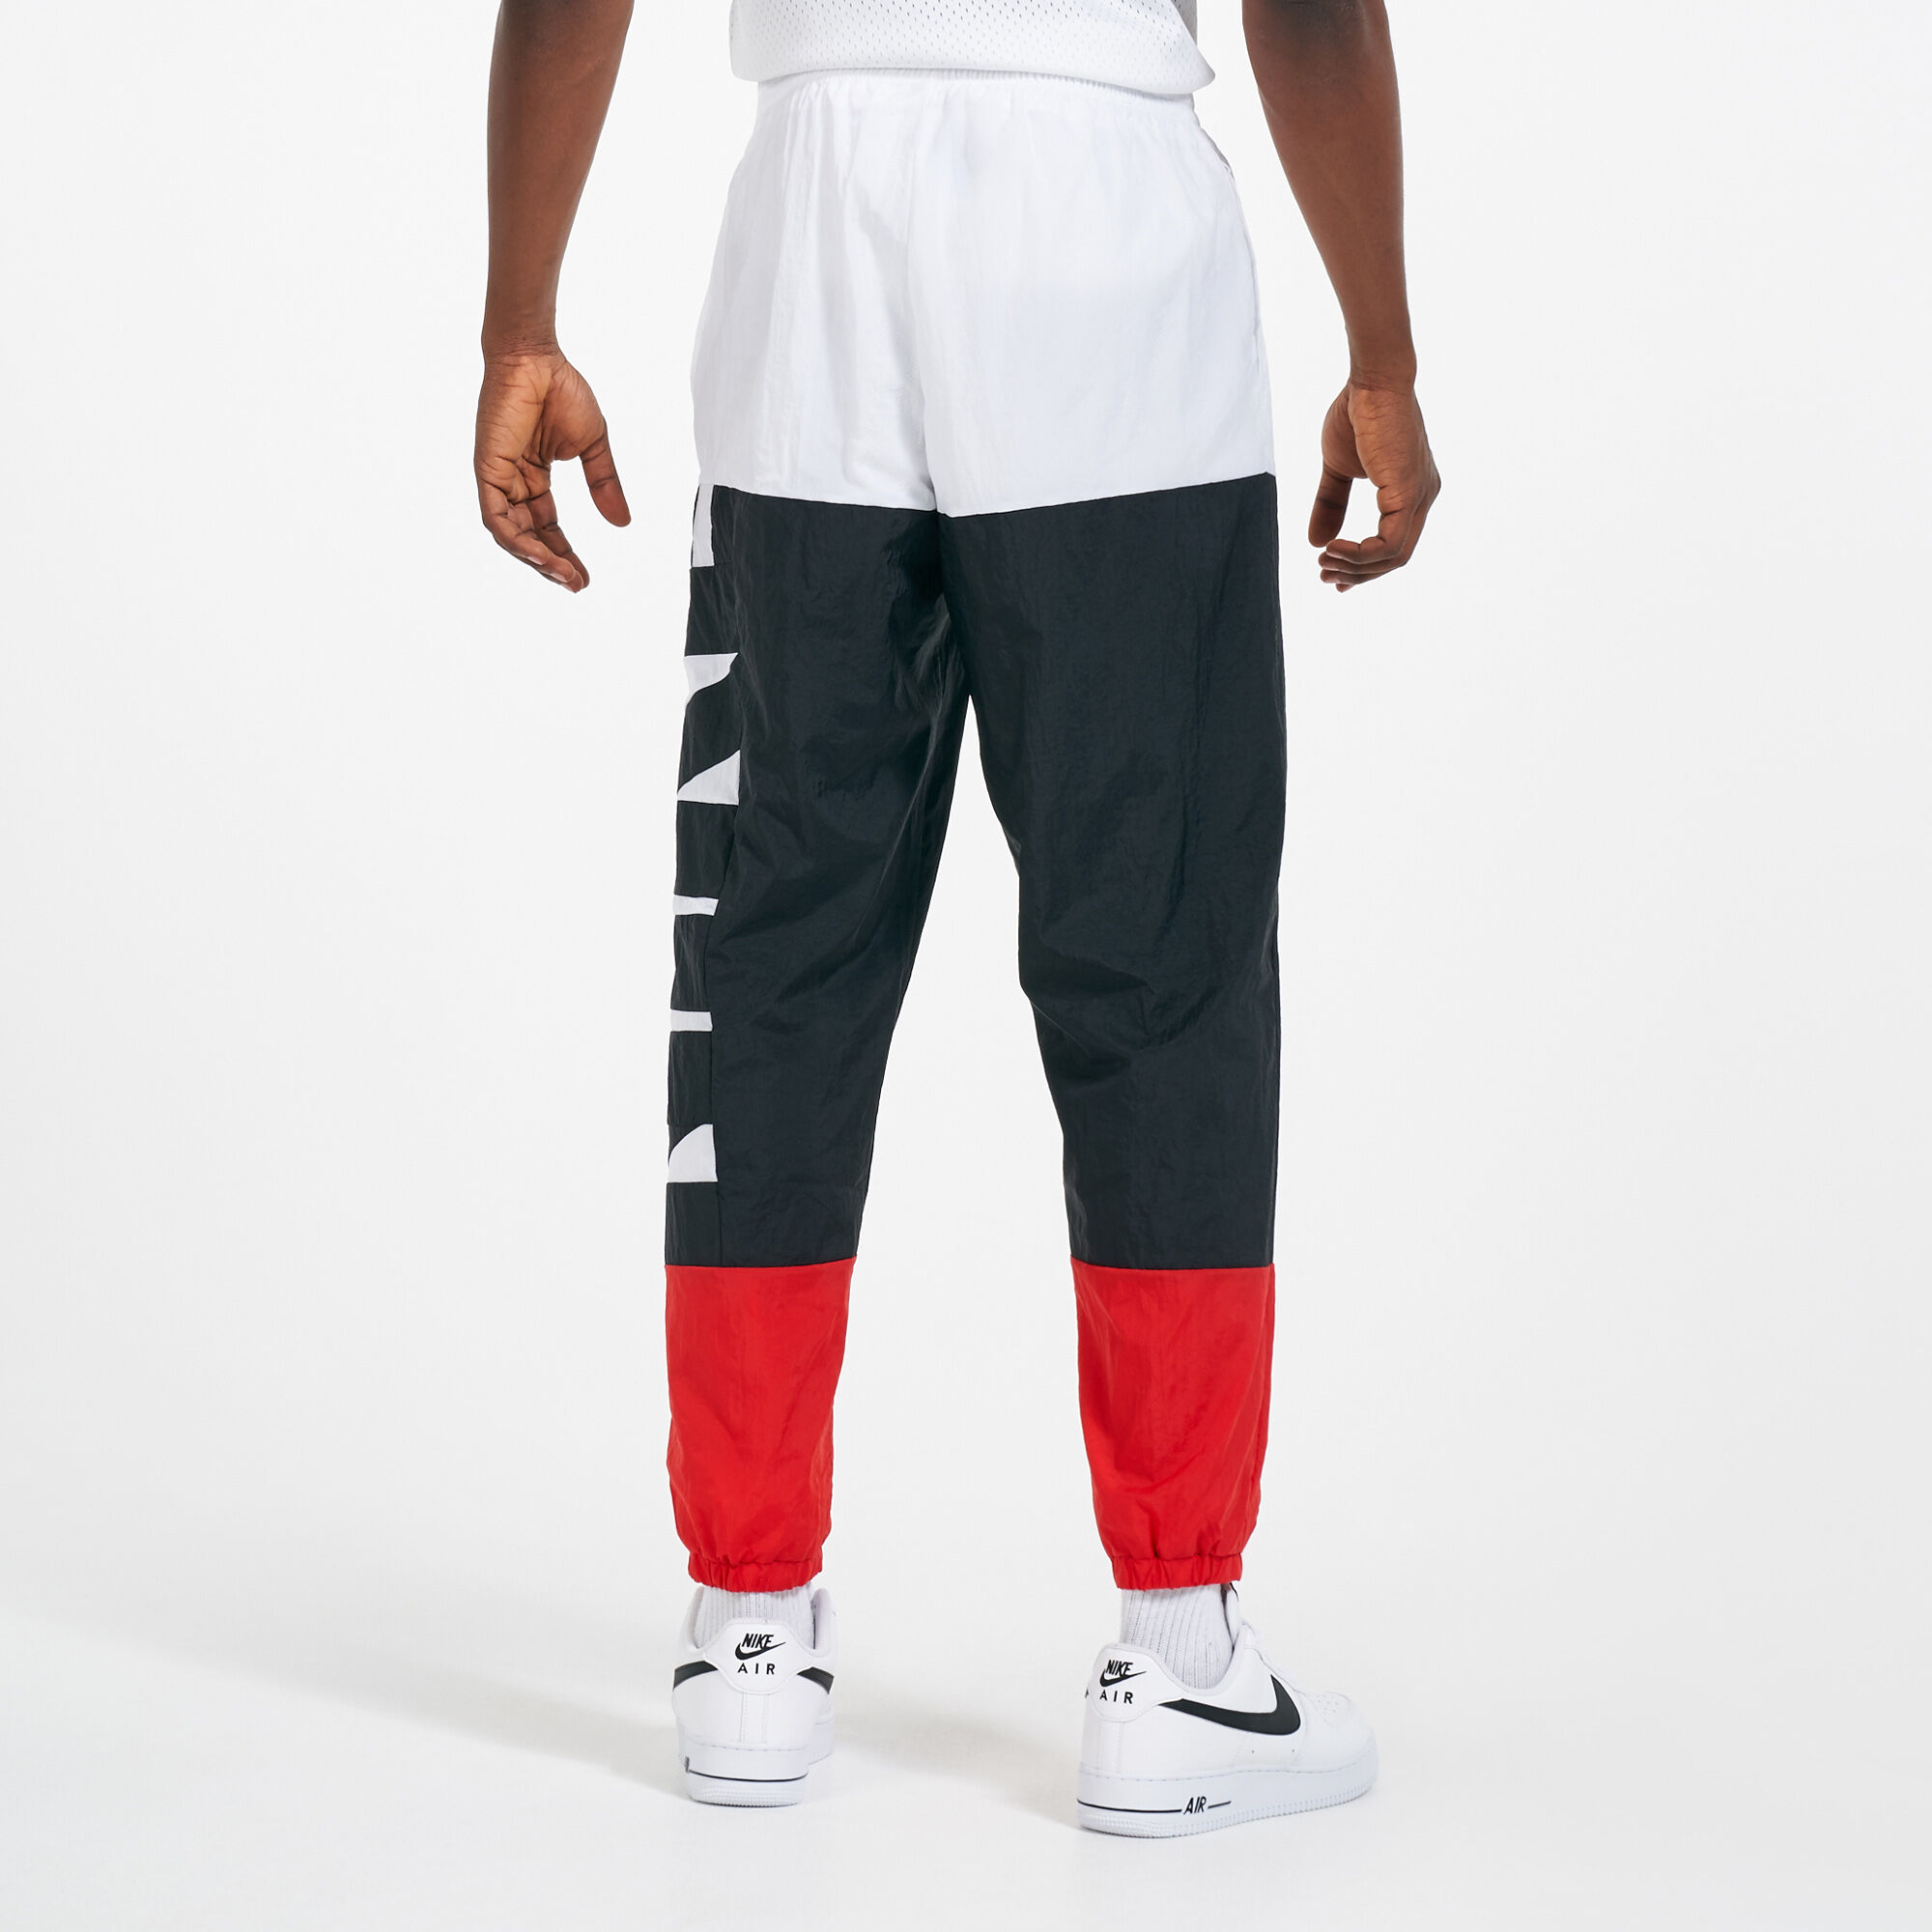 Buy Nike Trousers online - Women - 123 products | FASHIOLA.in